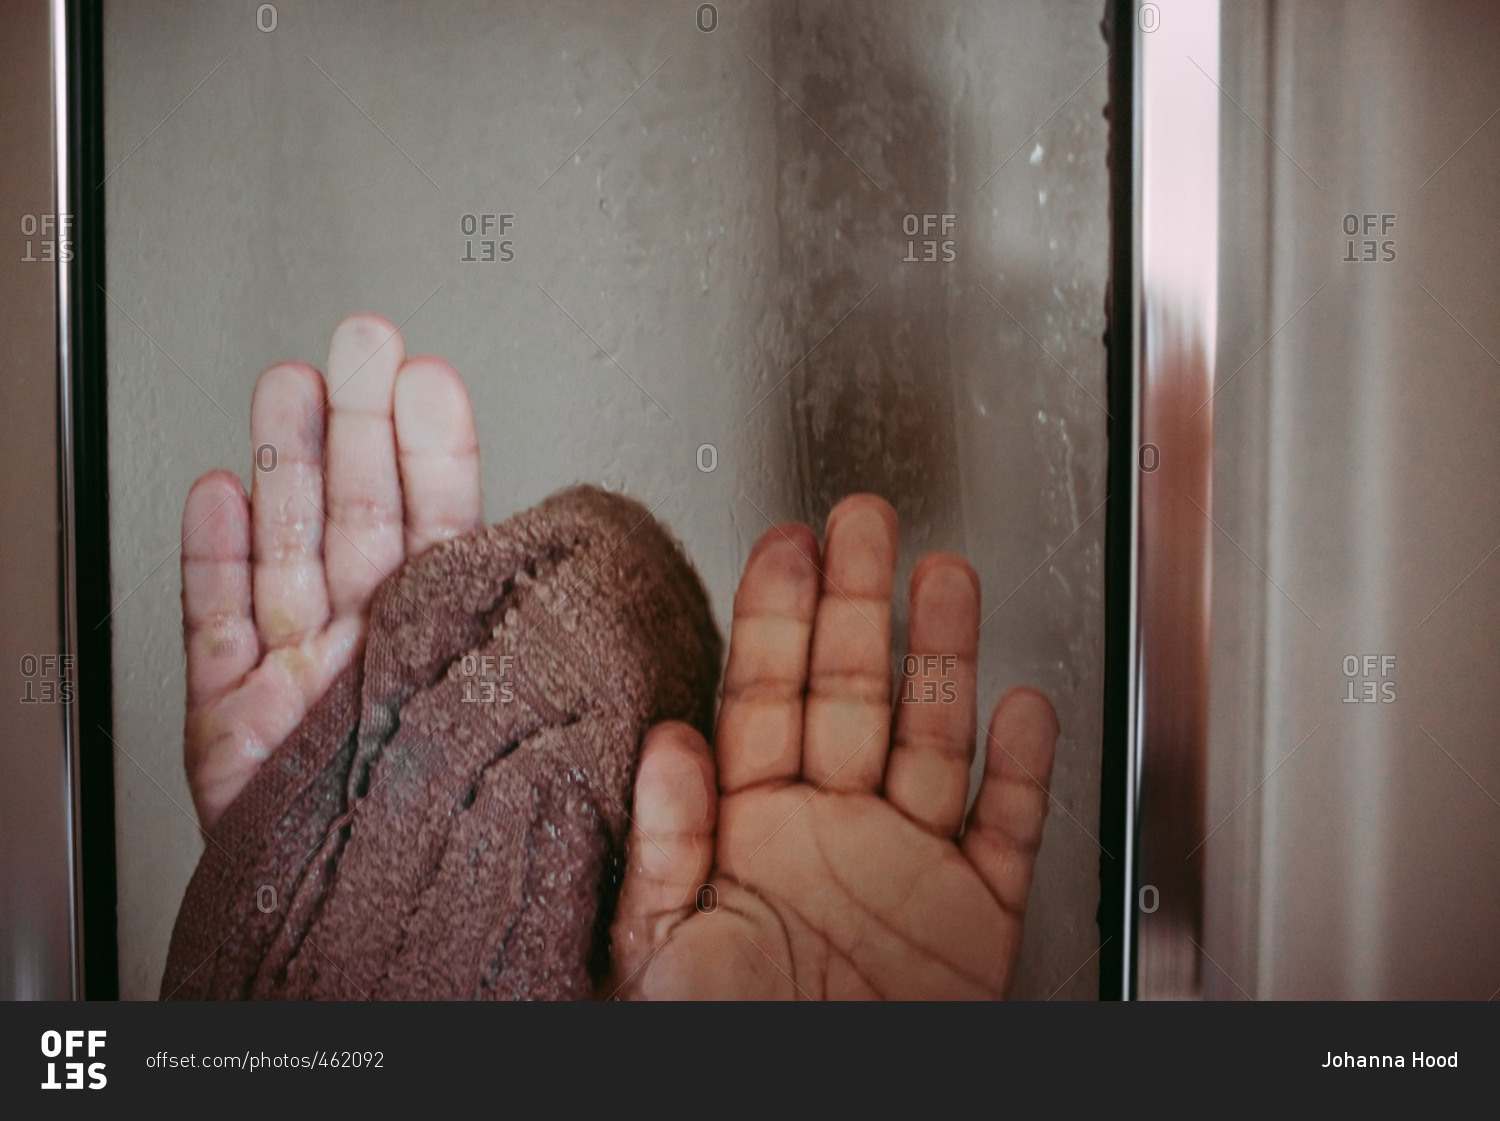 Hands of child with wash cloth pressed up against glass door of the shower